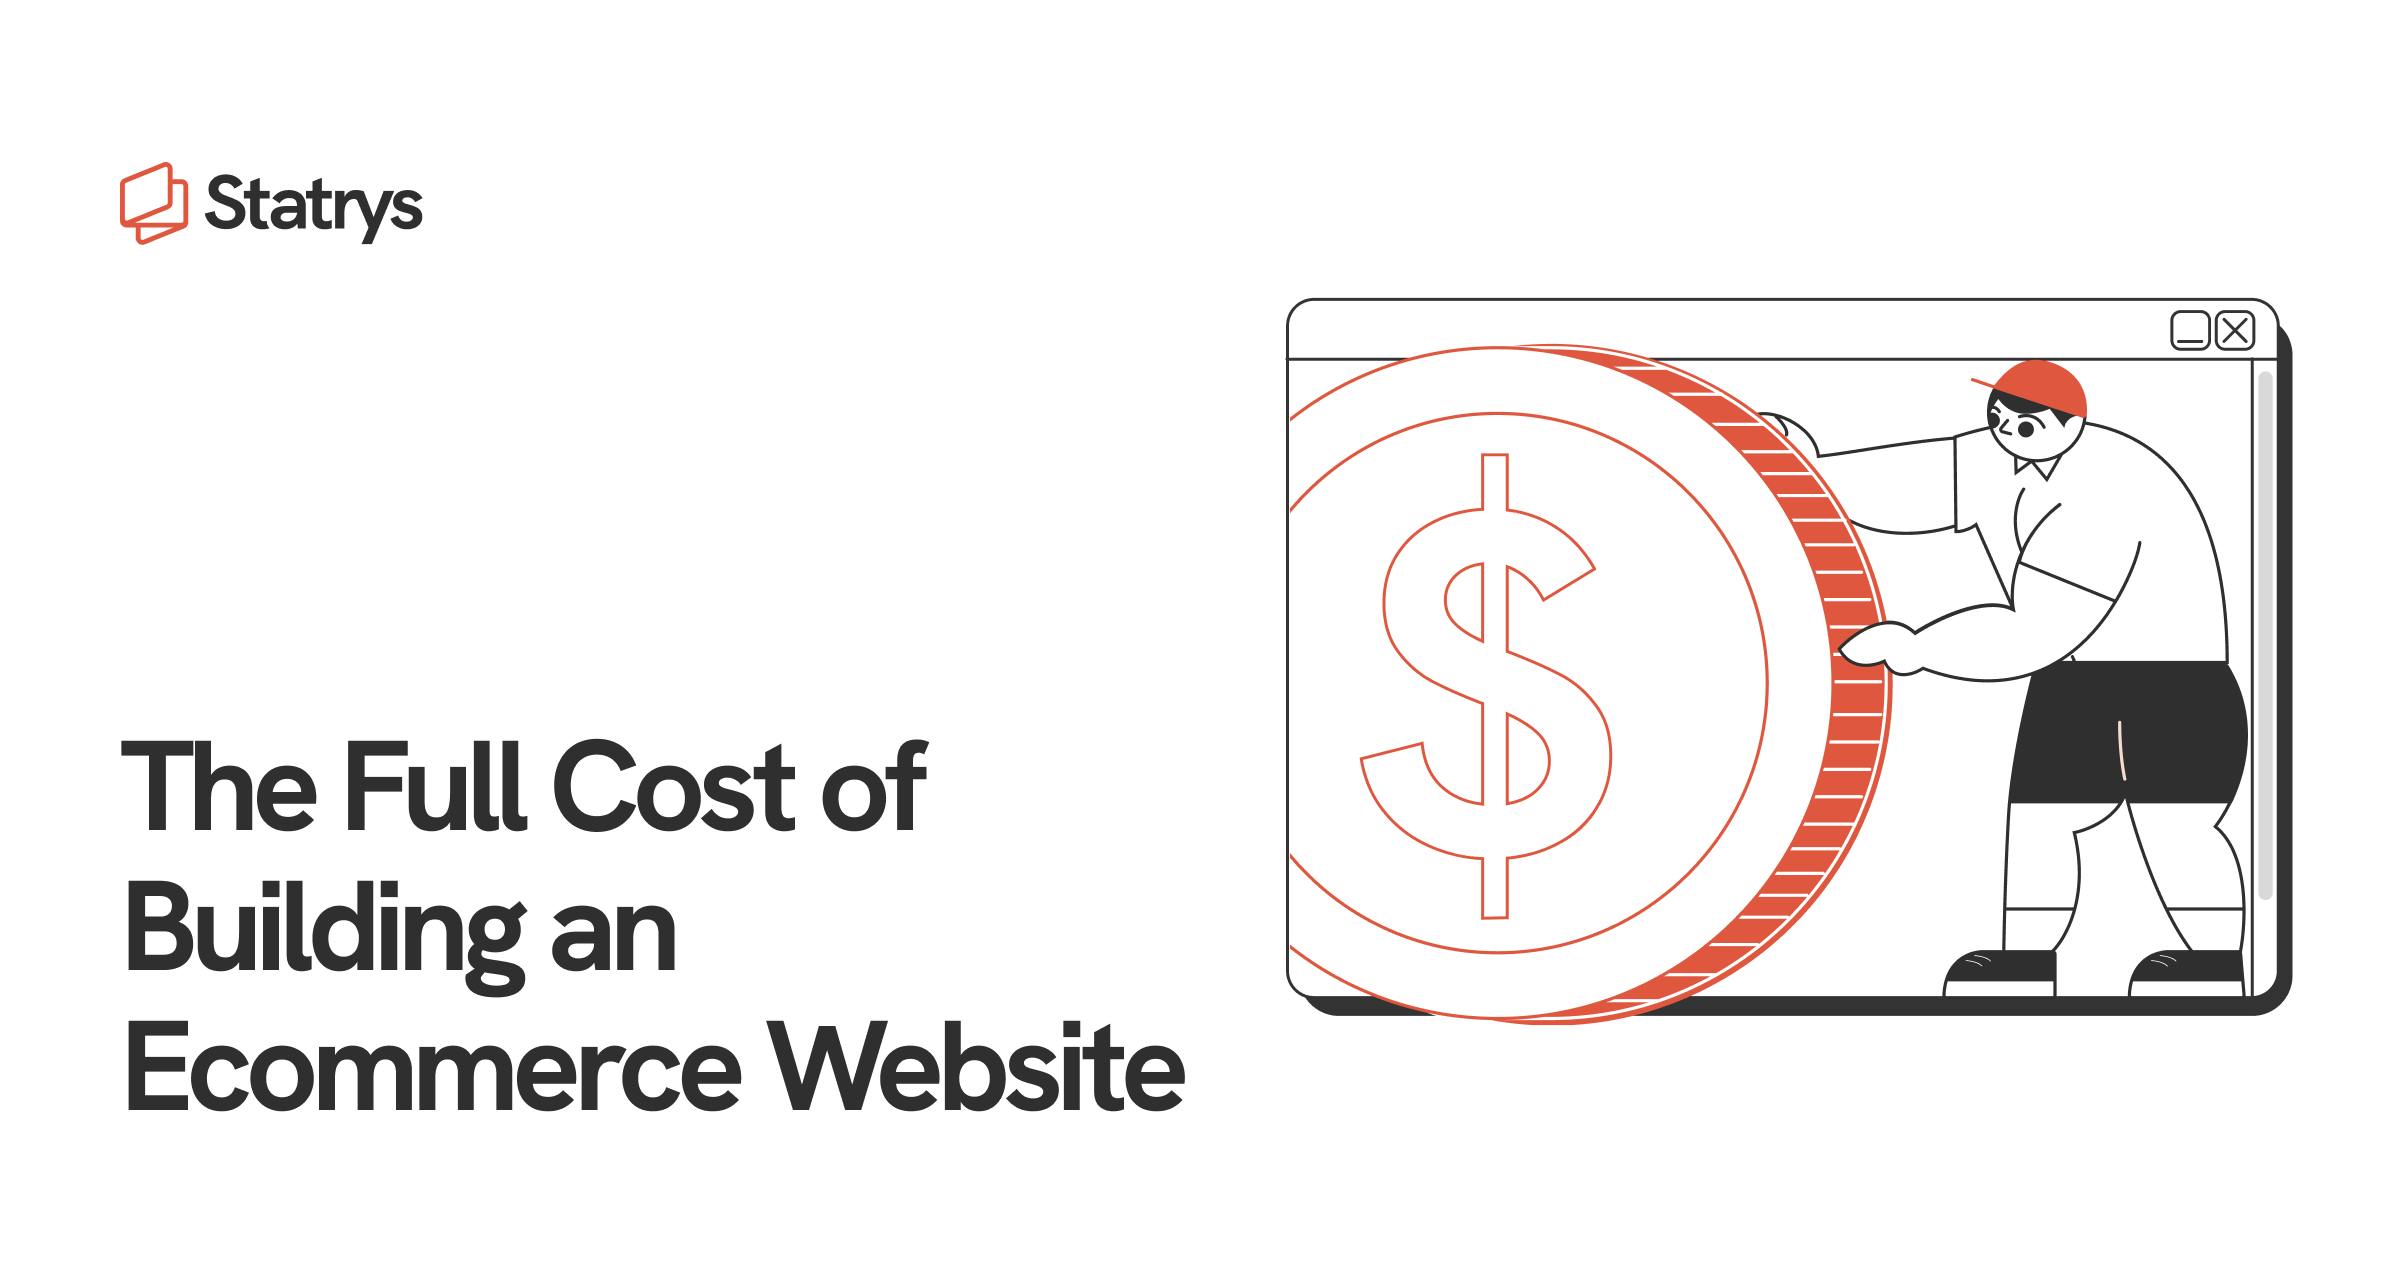 How much does it cost to build an ecommerce website?